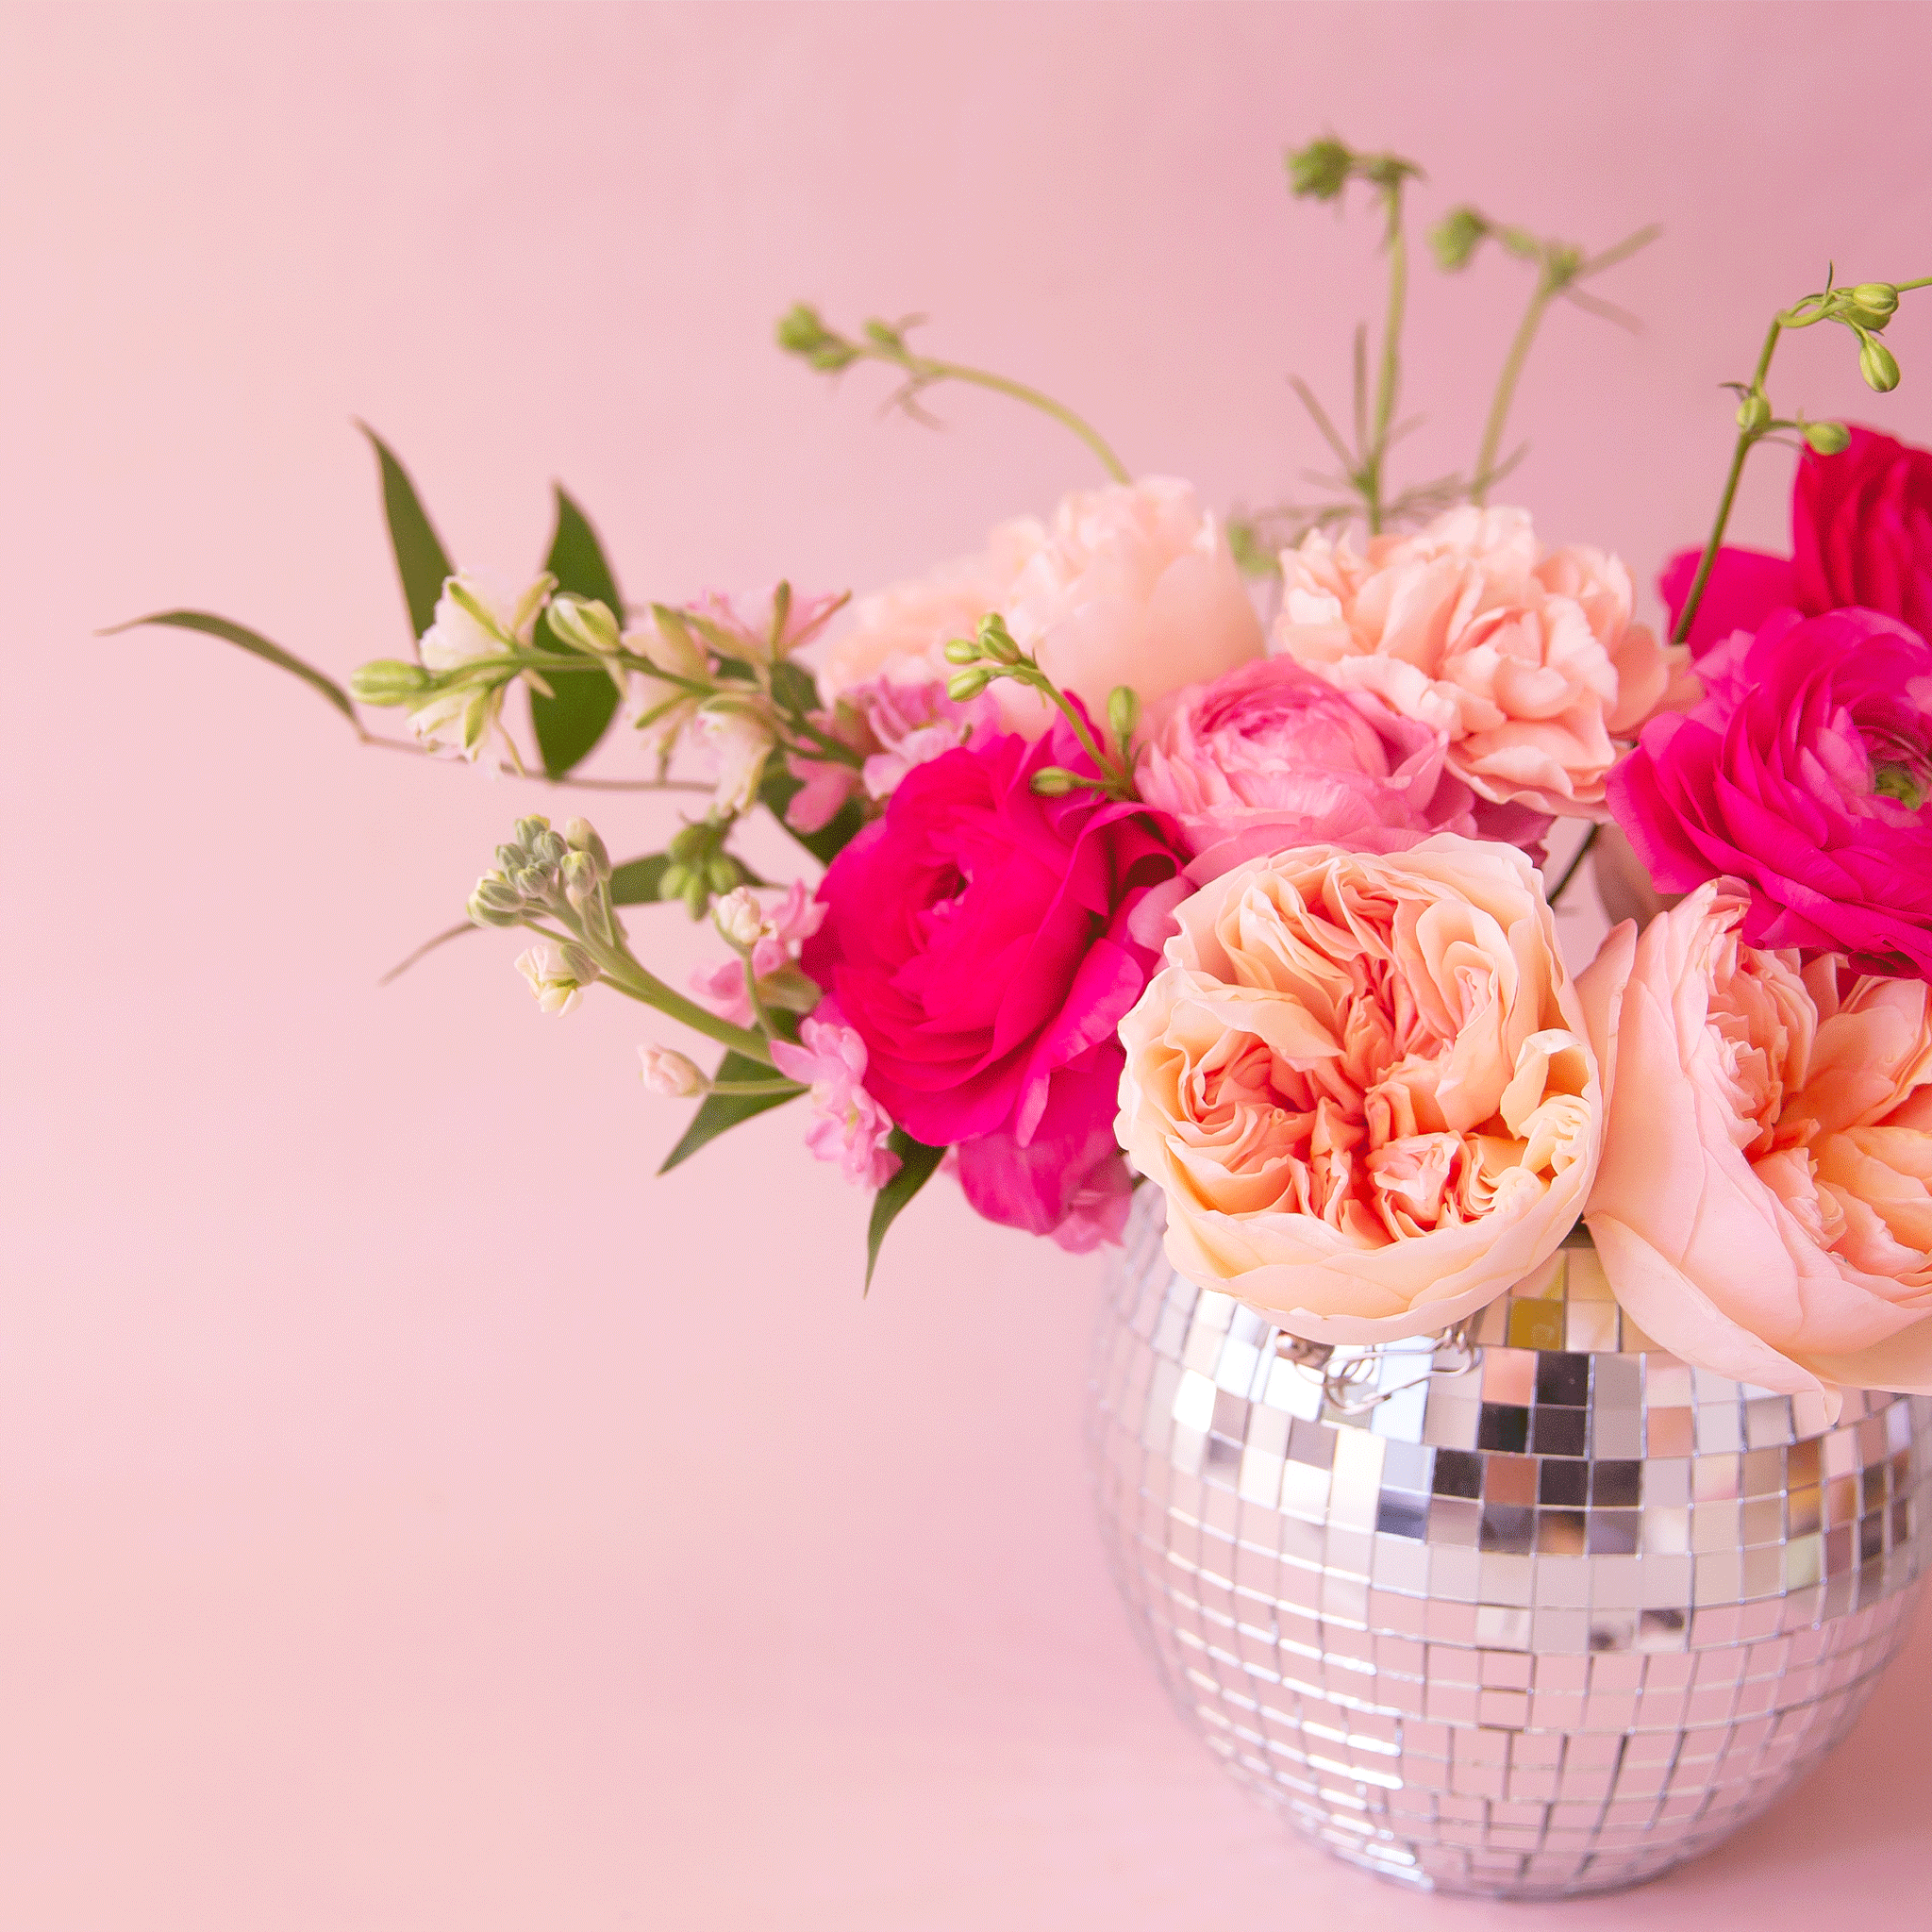 On a light pink background is a silver hanging planter with a pink flower arrangement in it.